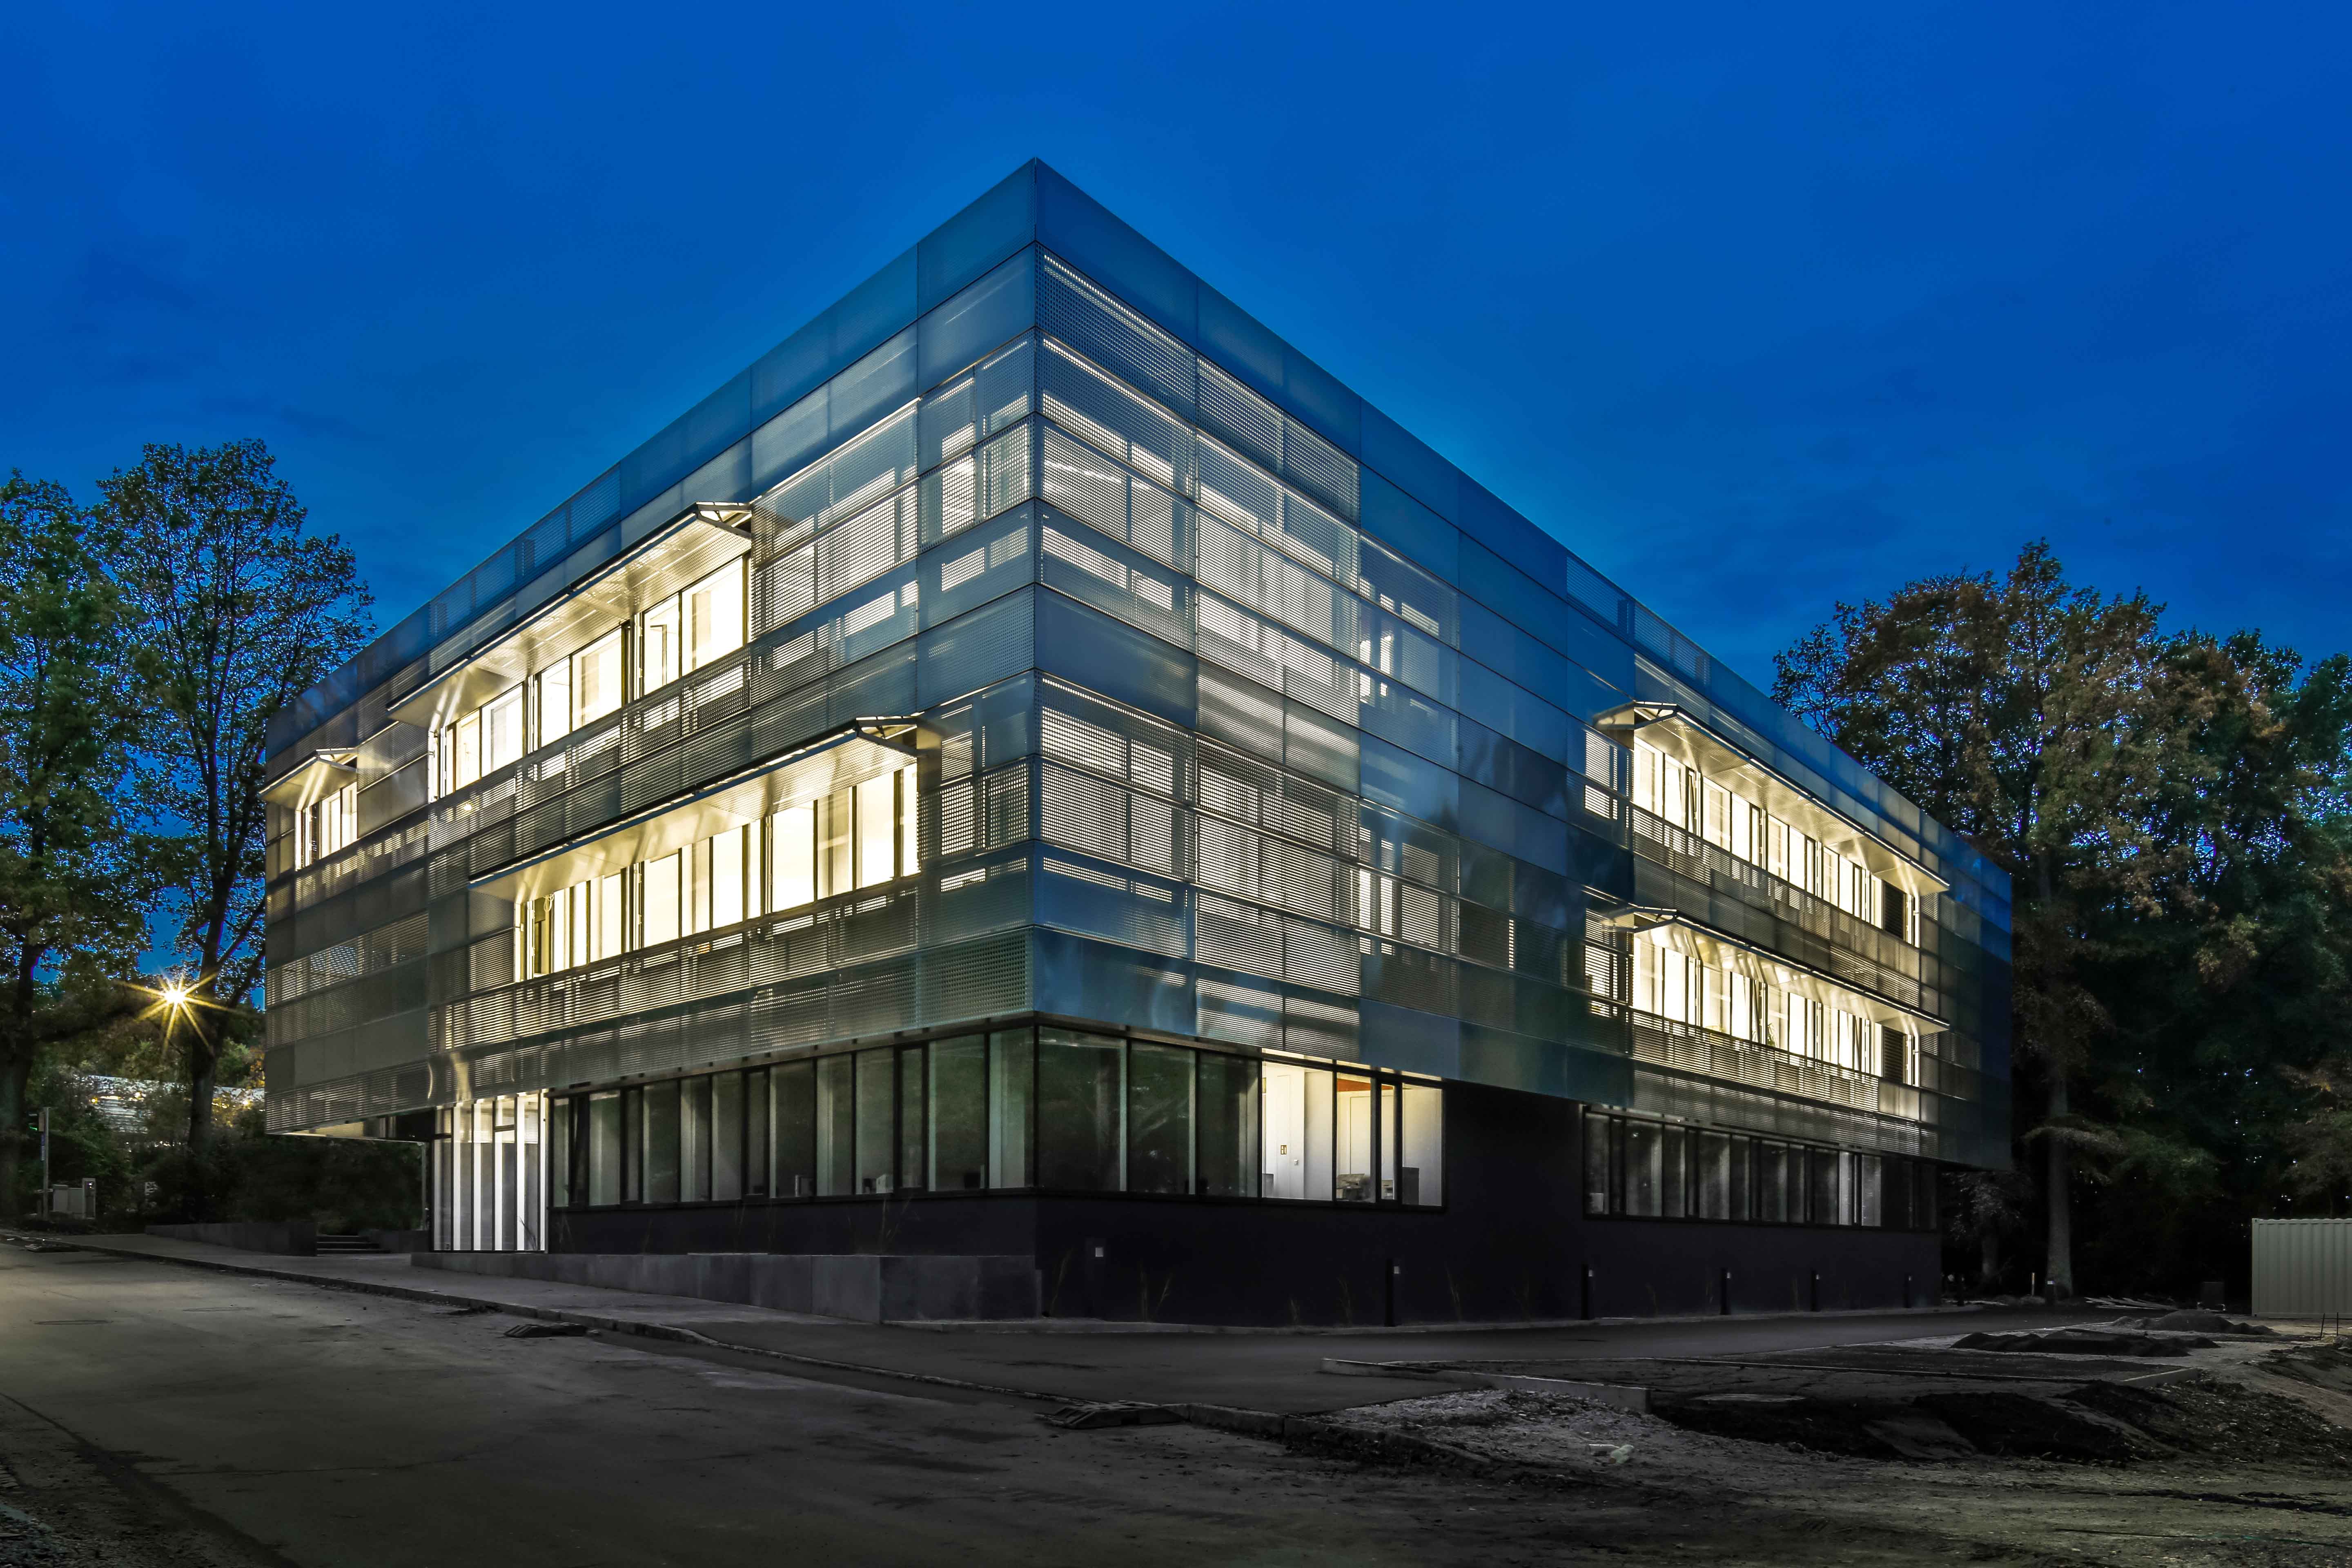 Helmholtz Institute Ulm - Completion of the Building